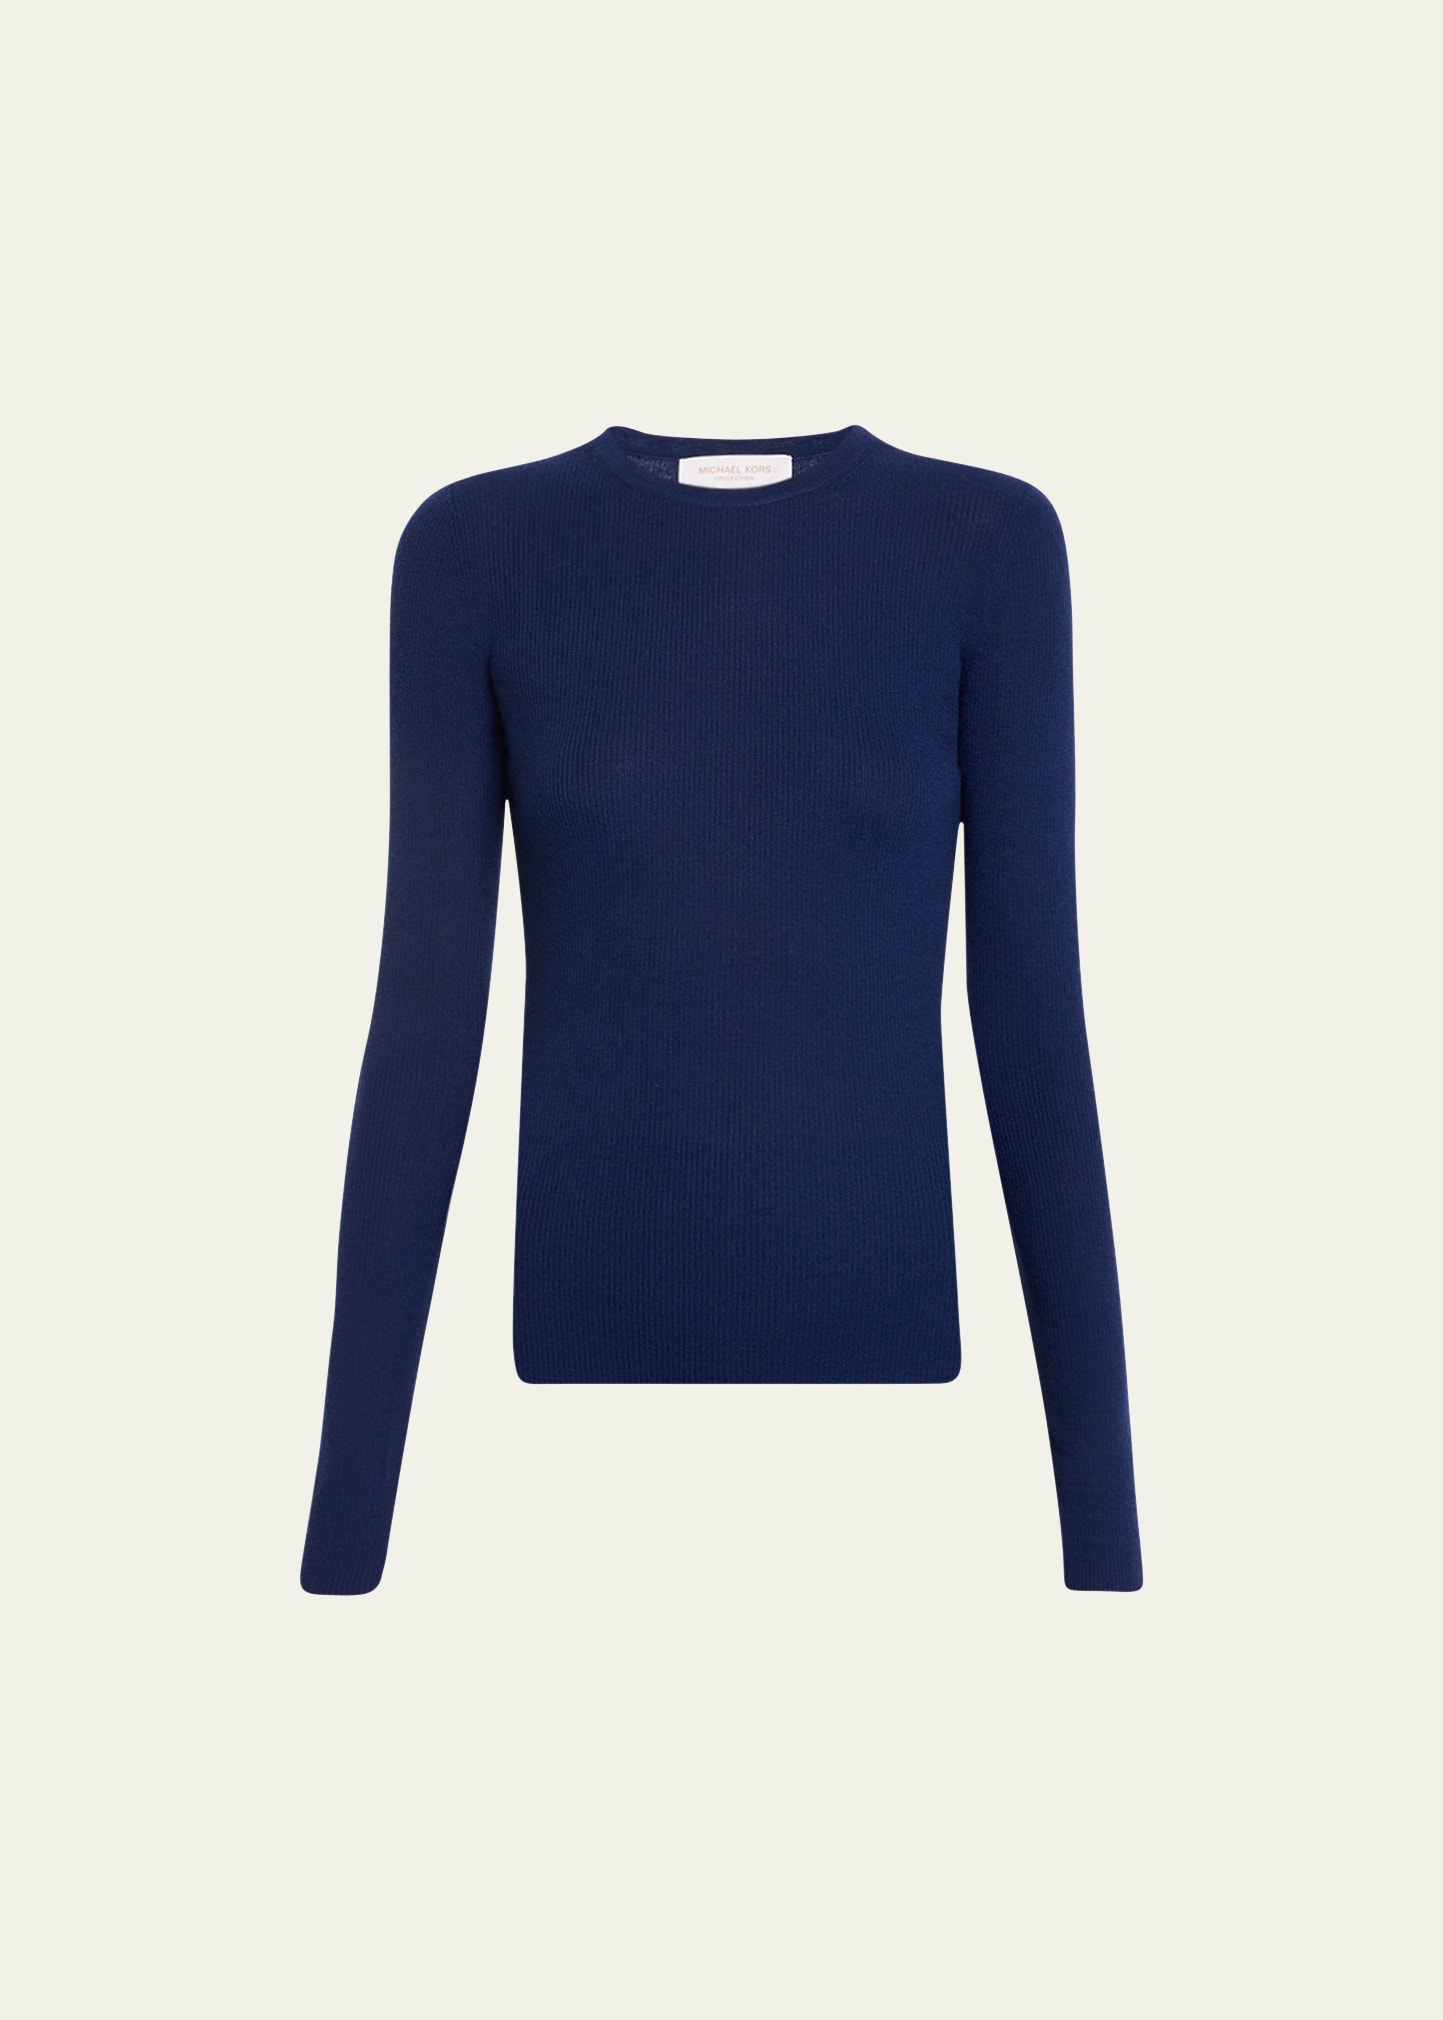 Michael Kors Hutton Ribbed Cashmere Pullover In Navy